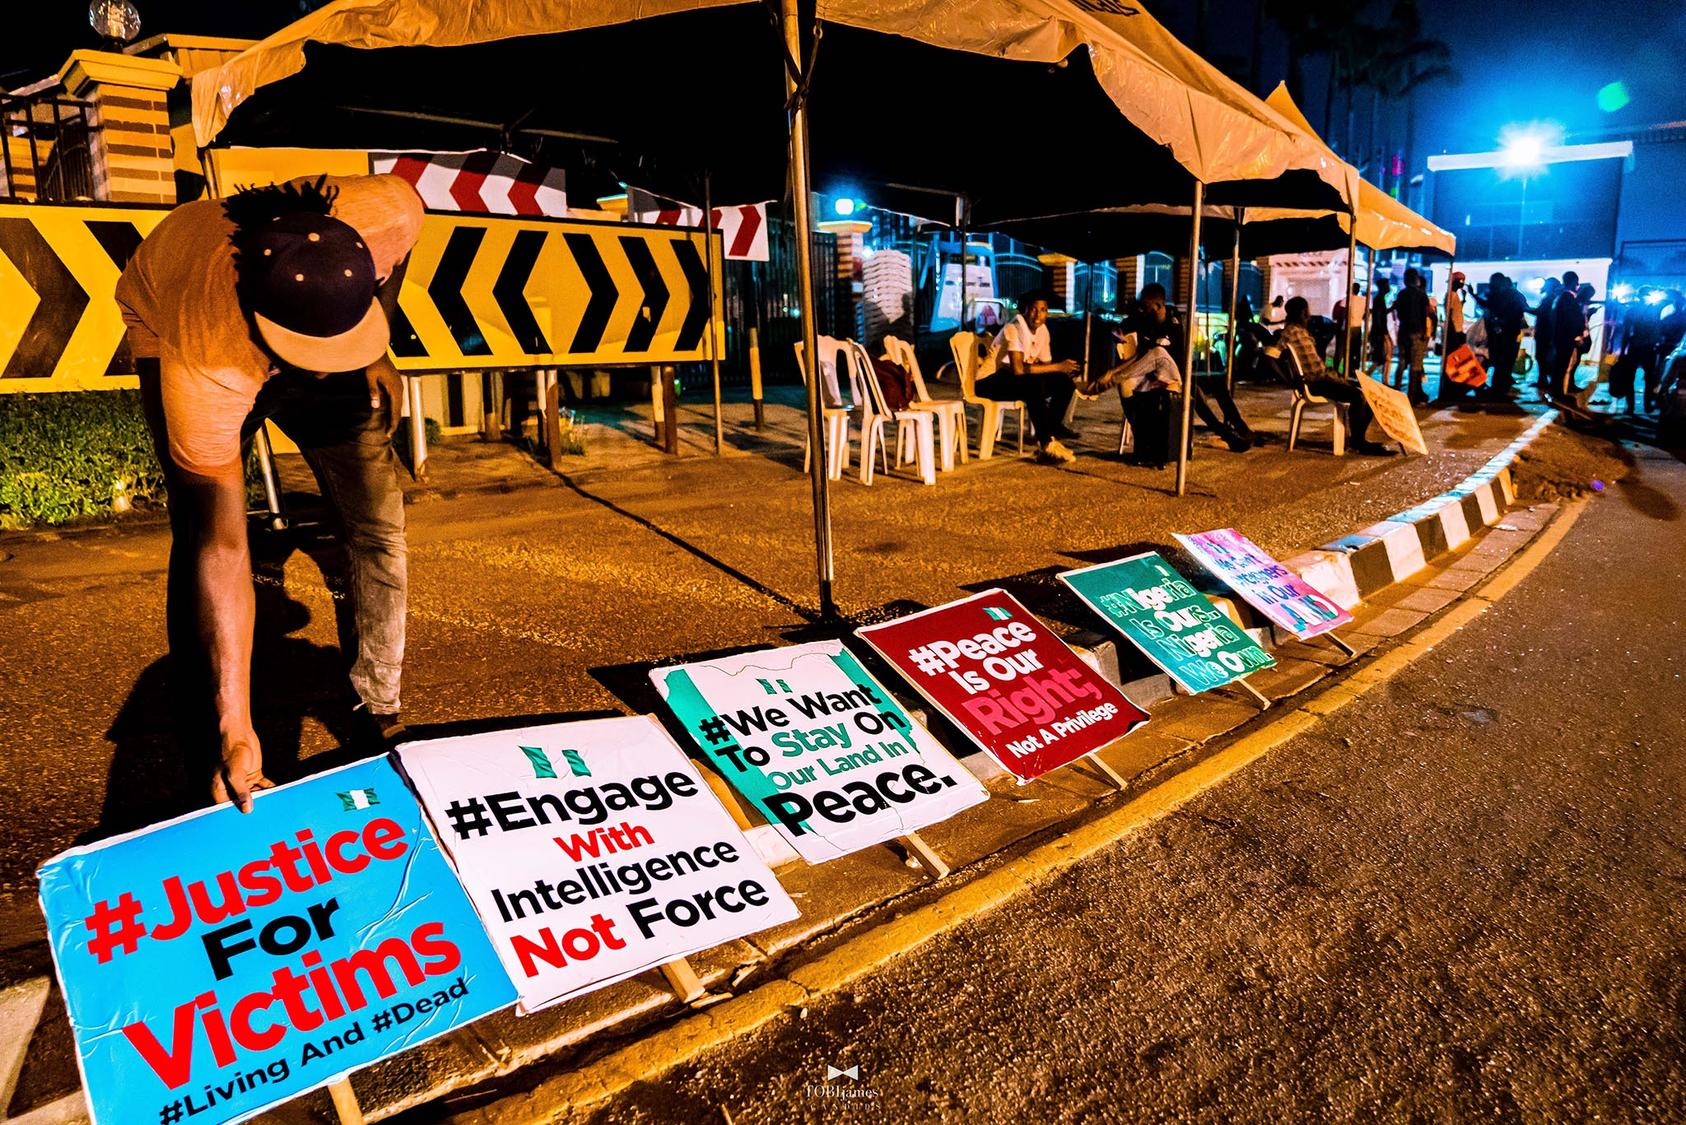 A protester spreads various placards that convey messages against the unlawful killings carried out by SARS, October 8, 2020. (TobiJamesCandids/CC License 4.0)